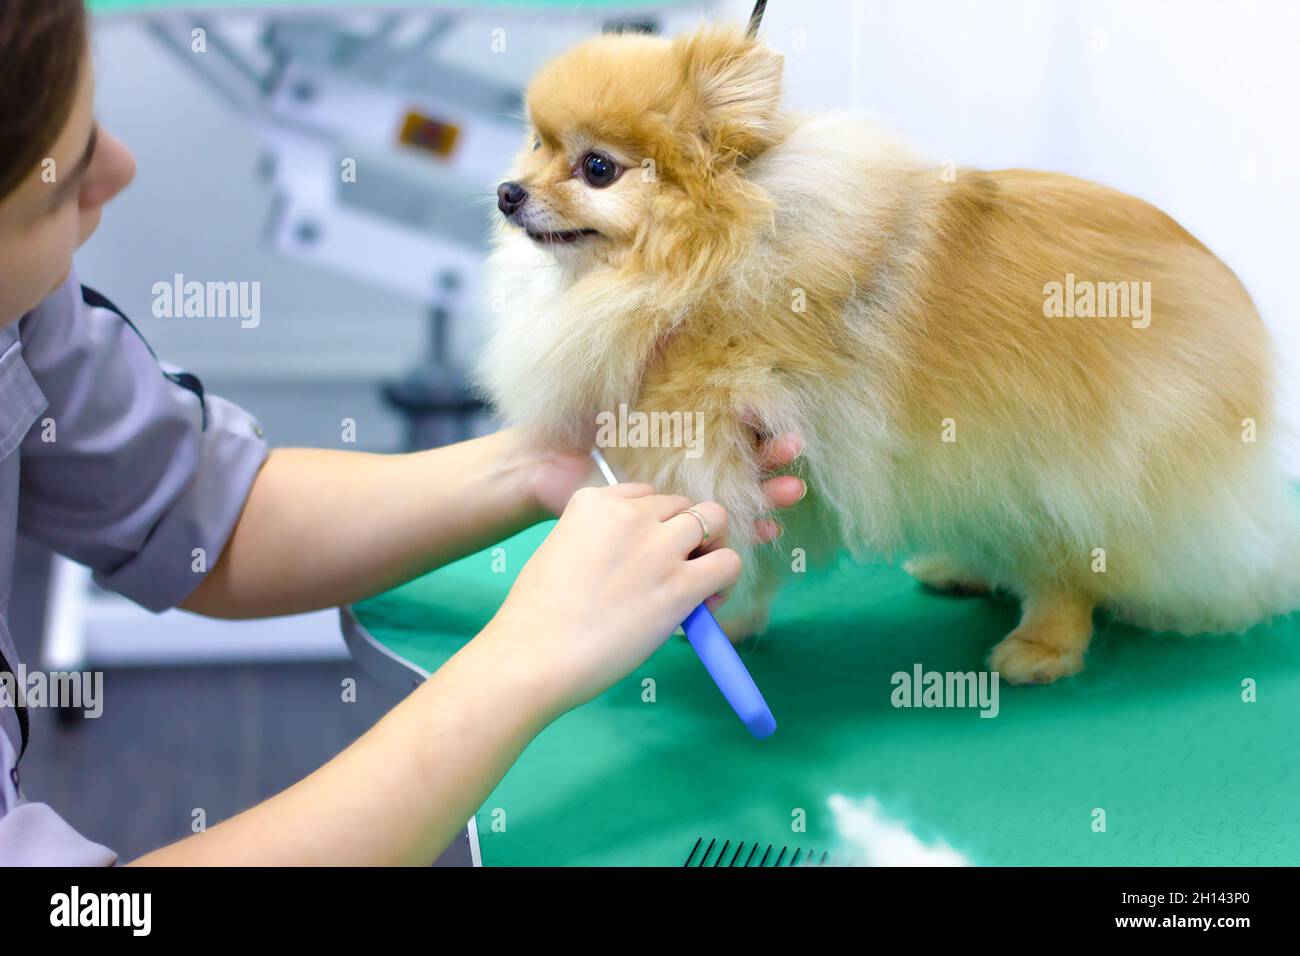 A young woman combs and dries the dog's fur, looks after a puppy in the salon People, work, profession and animal care. Stock Photo